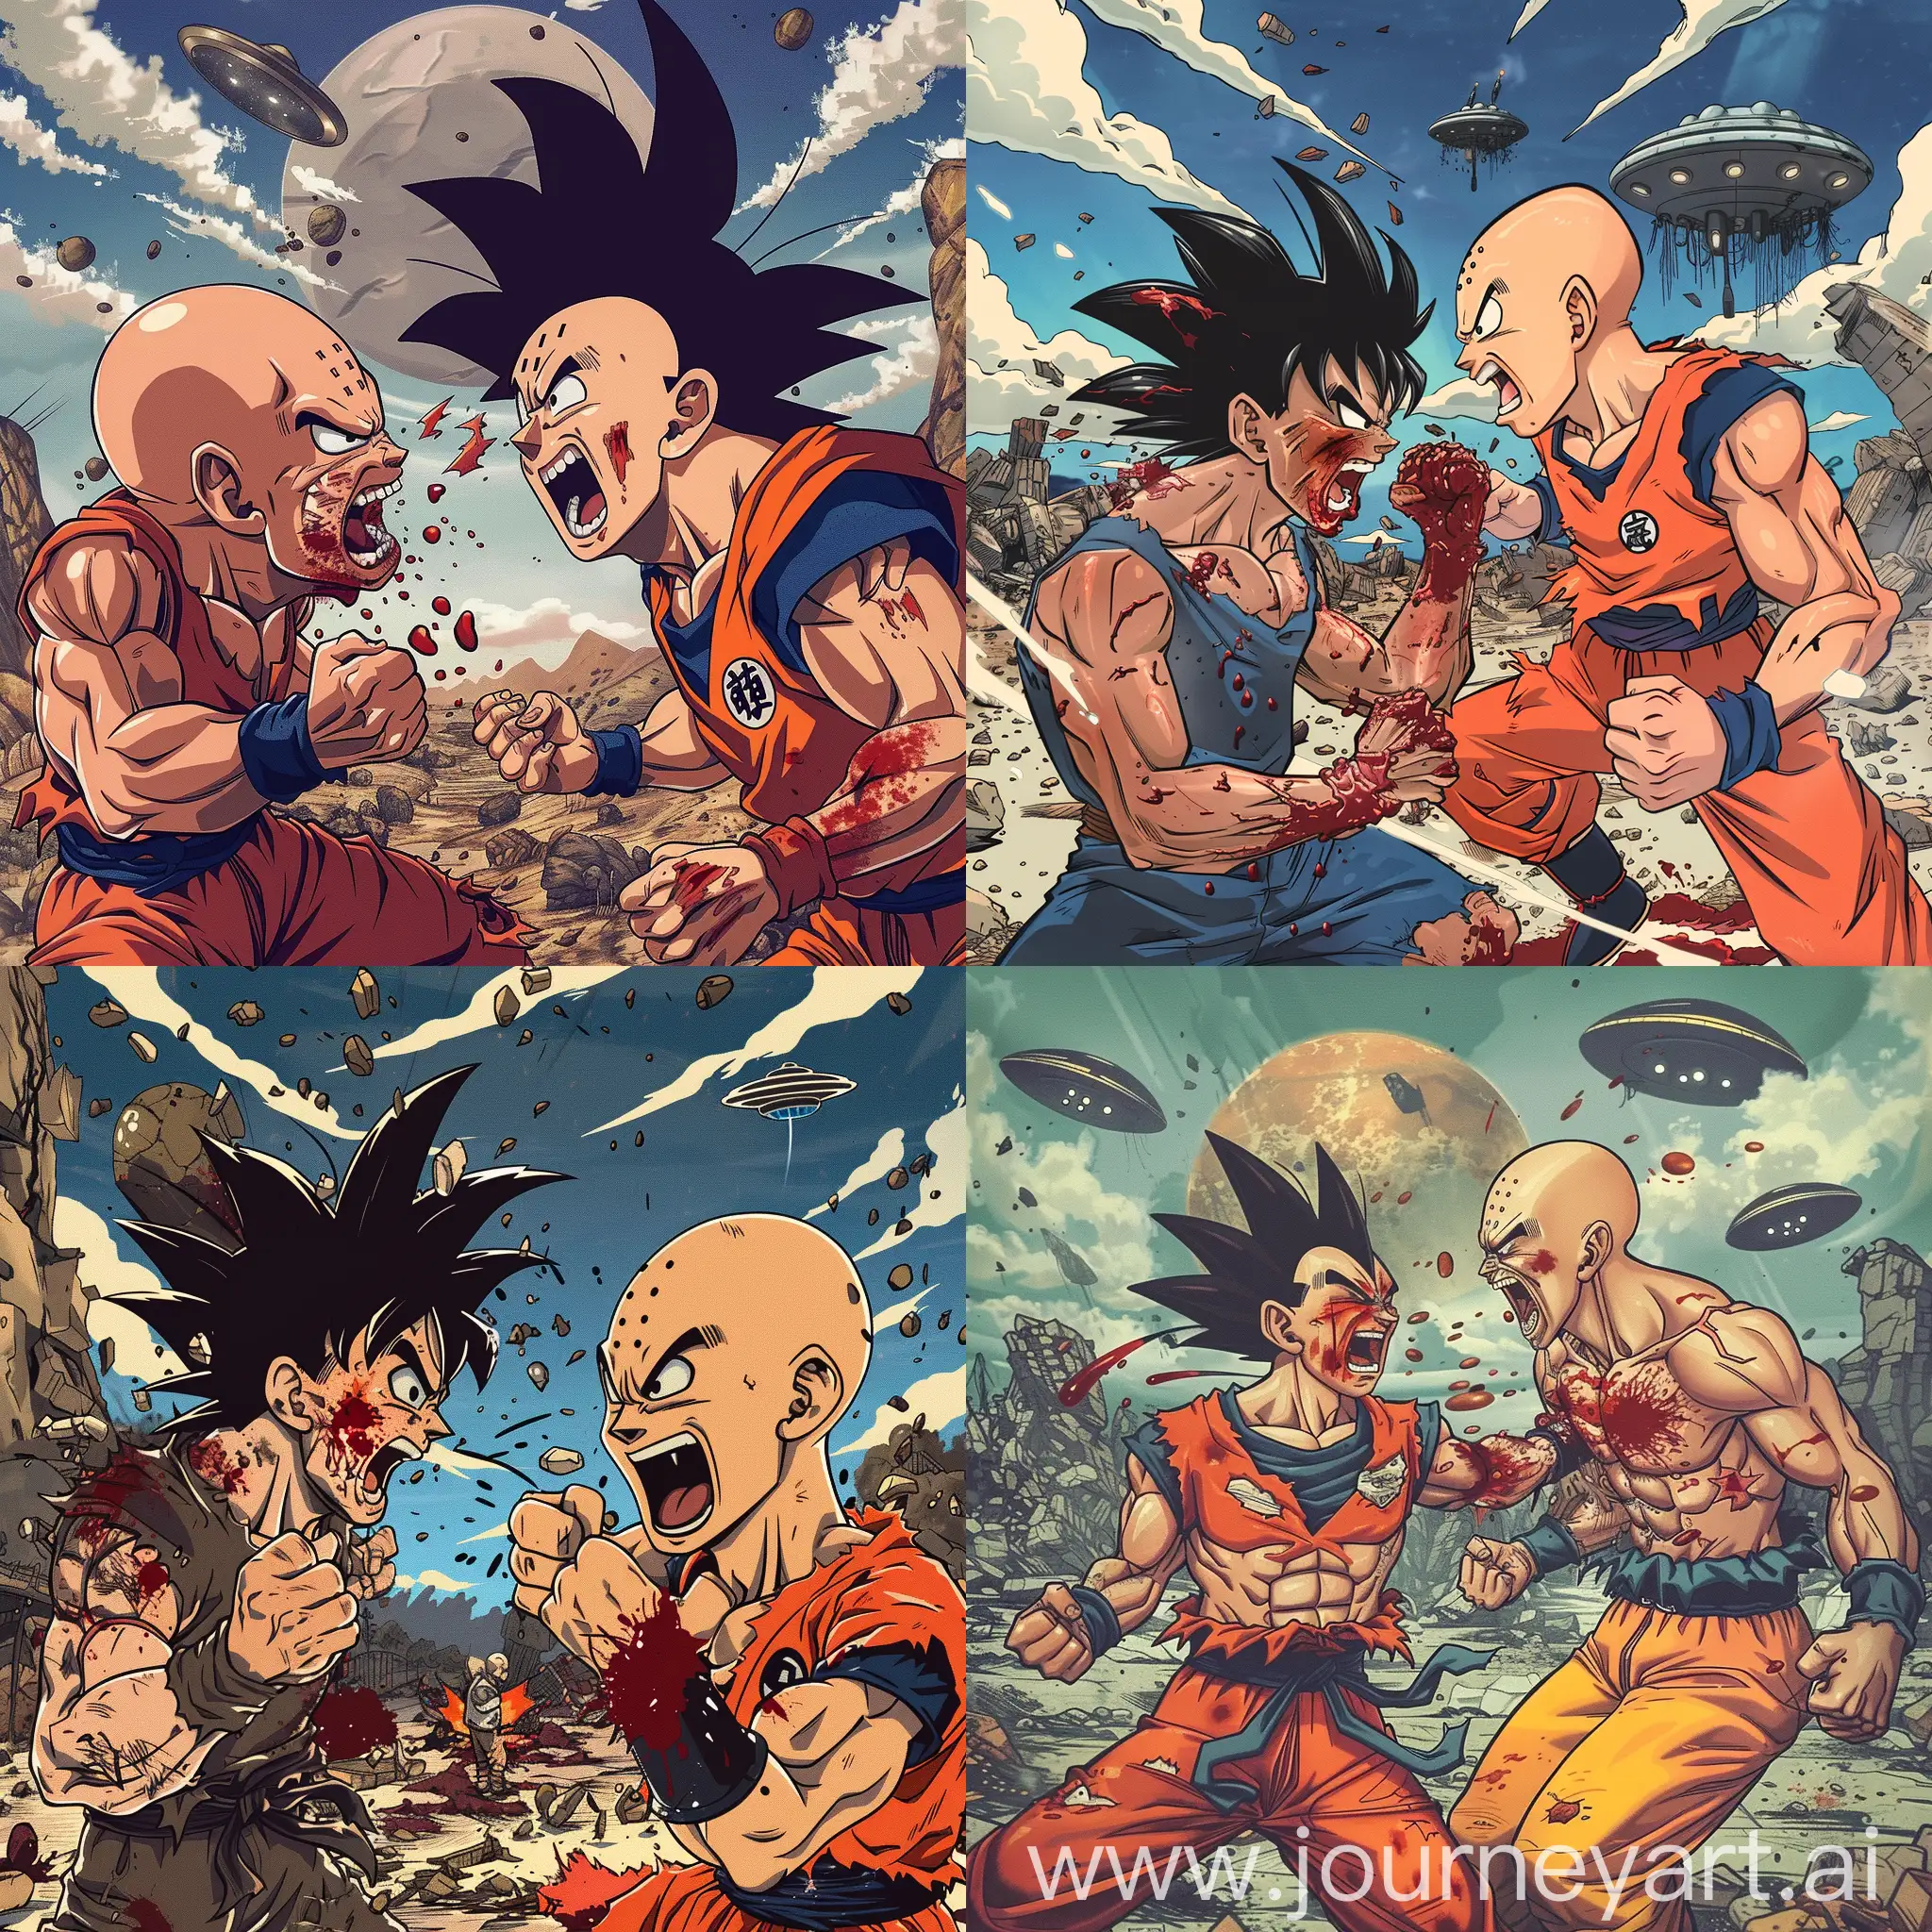 Son Goku of Dragon Ball is fighting against Saitama of One punch man, both are angry, injured and have blood on their lips, in a apocalyptic planet in ruin, ufos on sky